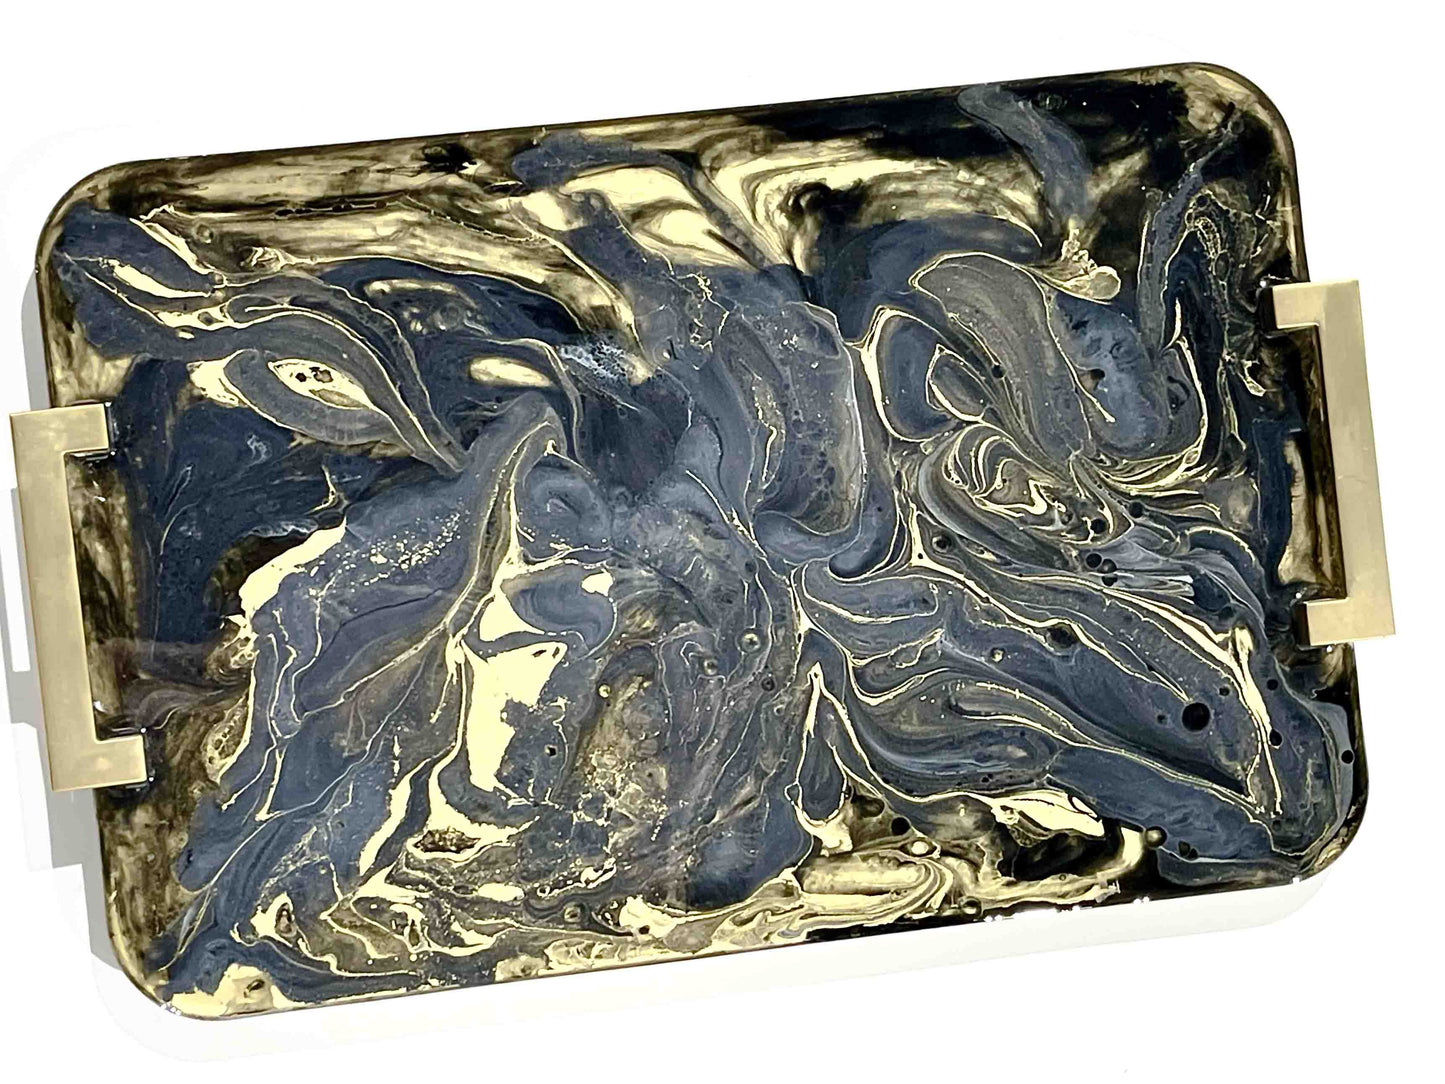 Resin Tray - SOLD